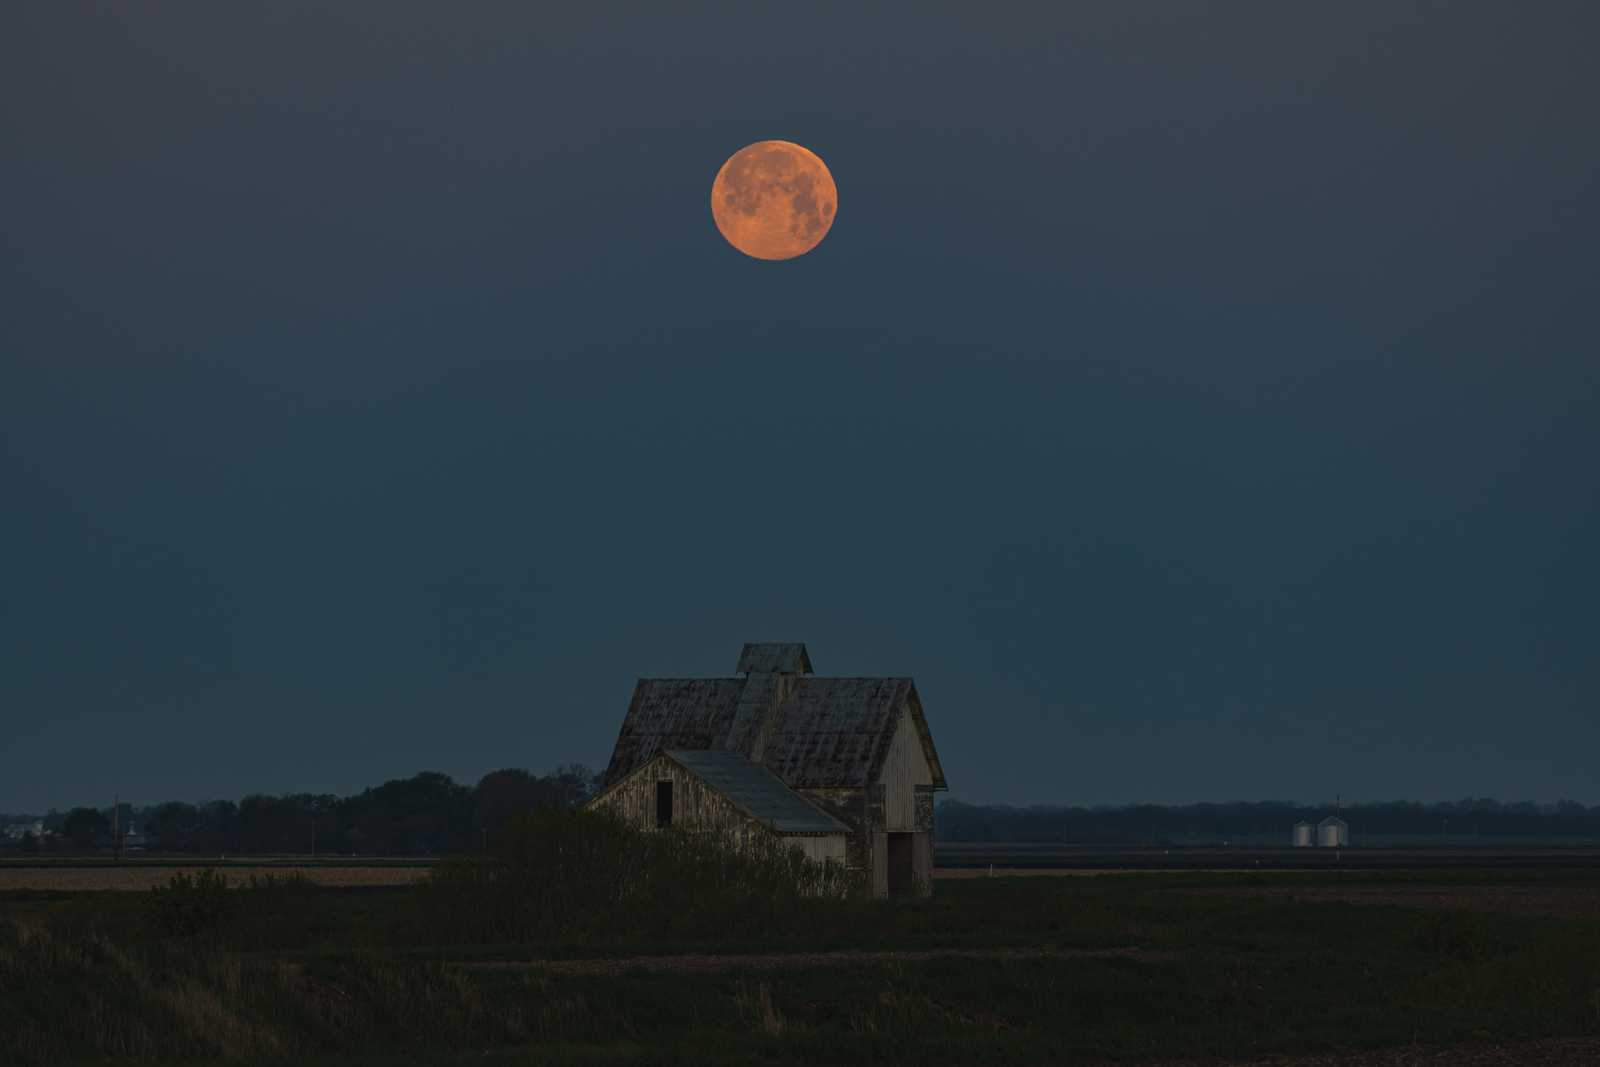 Another photo: the moon sets as dawn brightens the sky above some farm buildings in a field